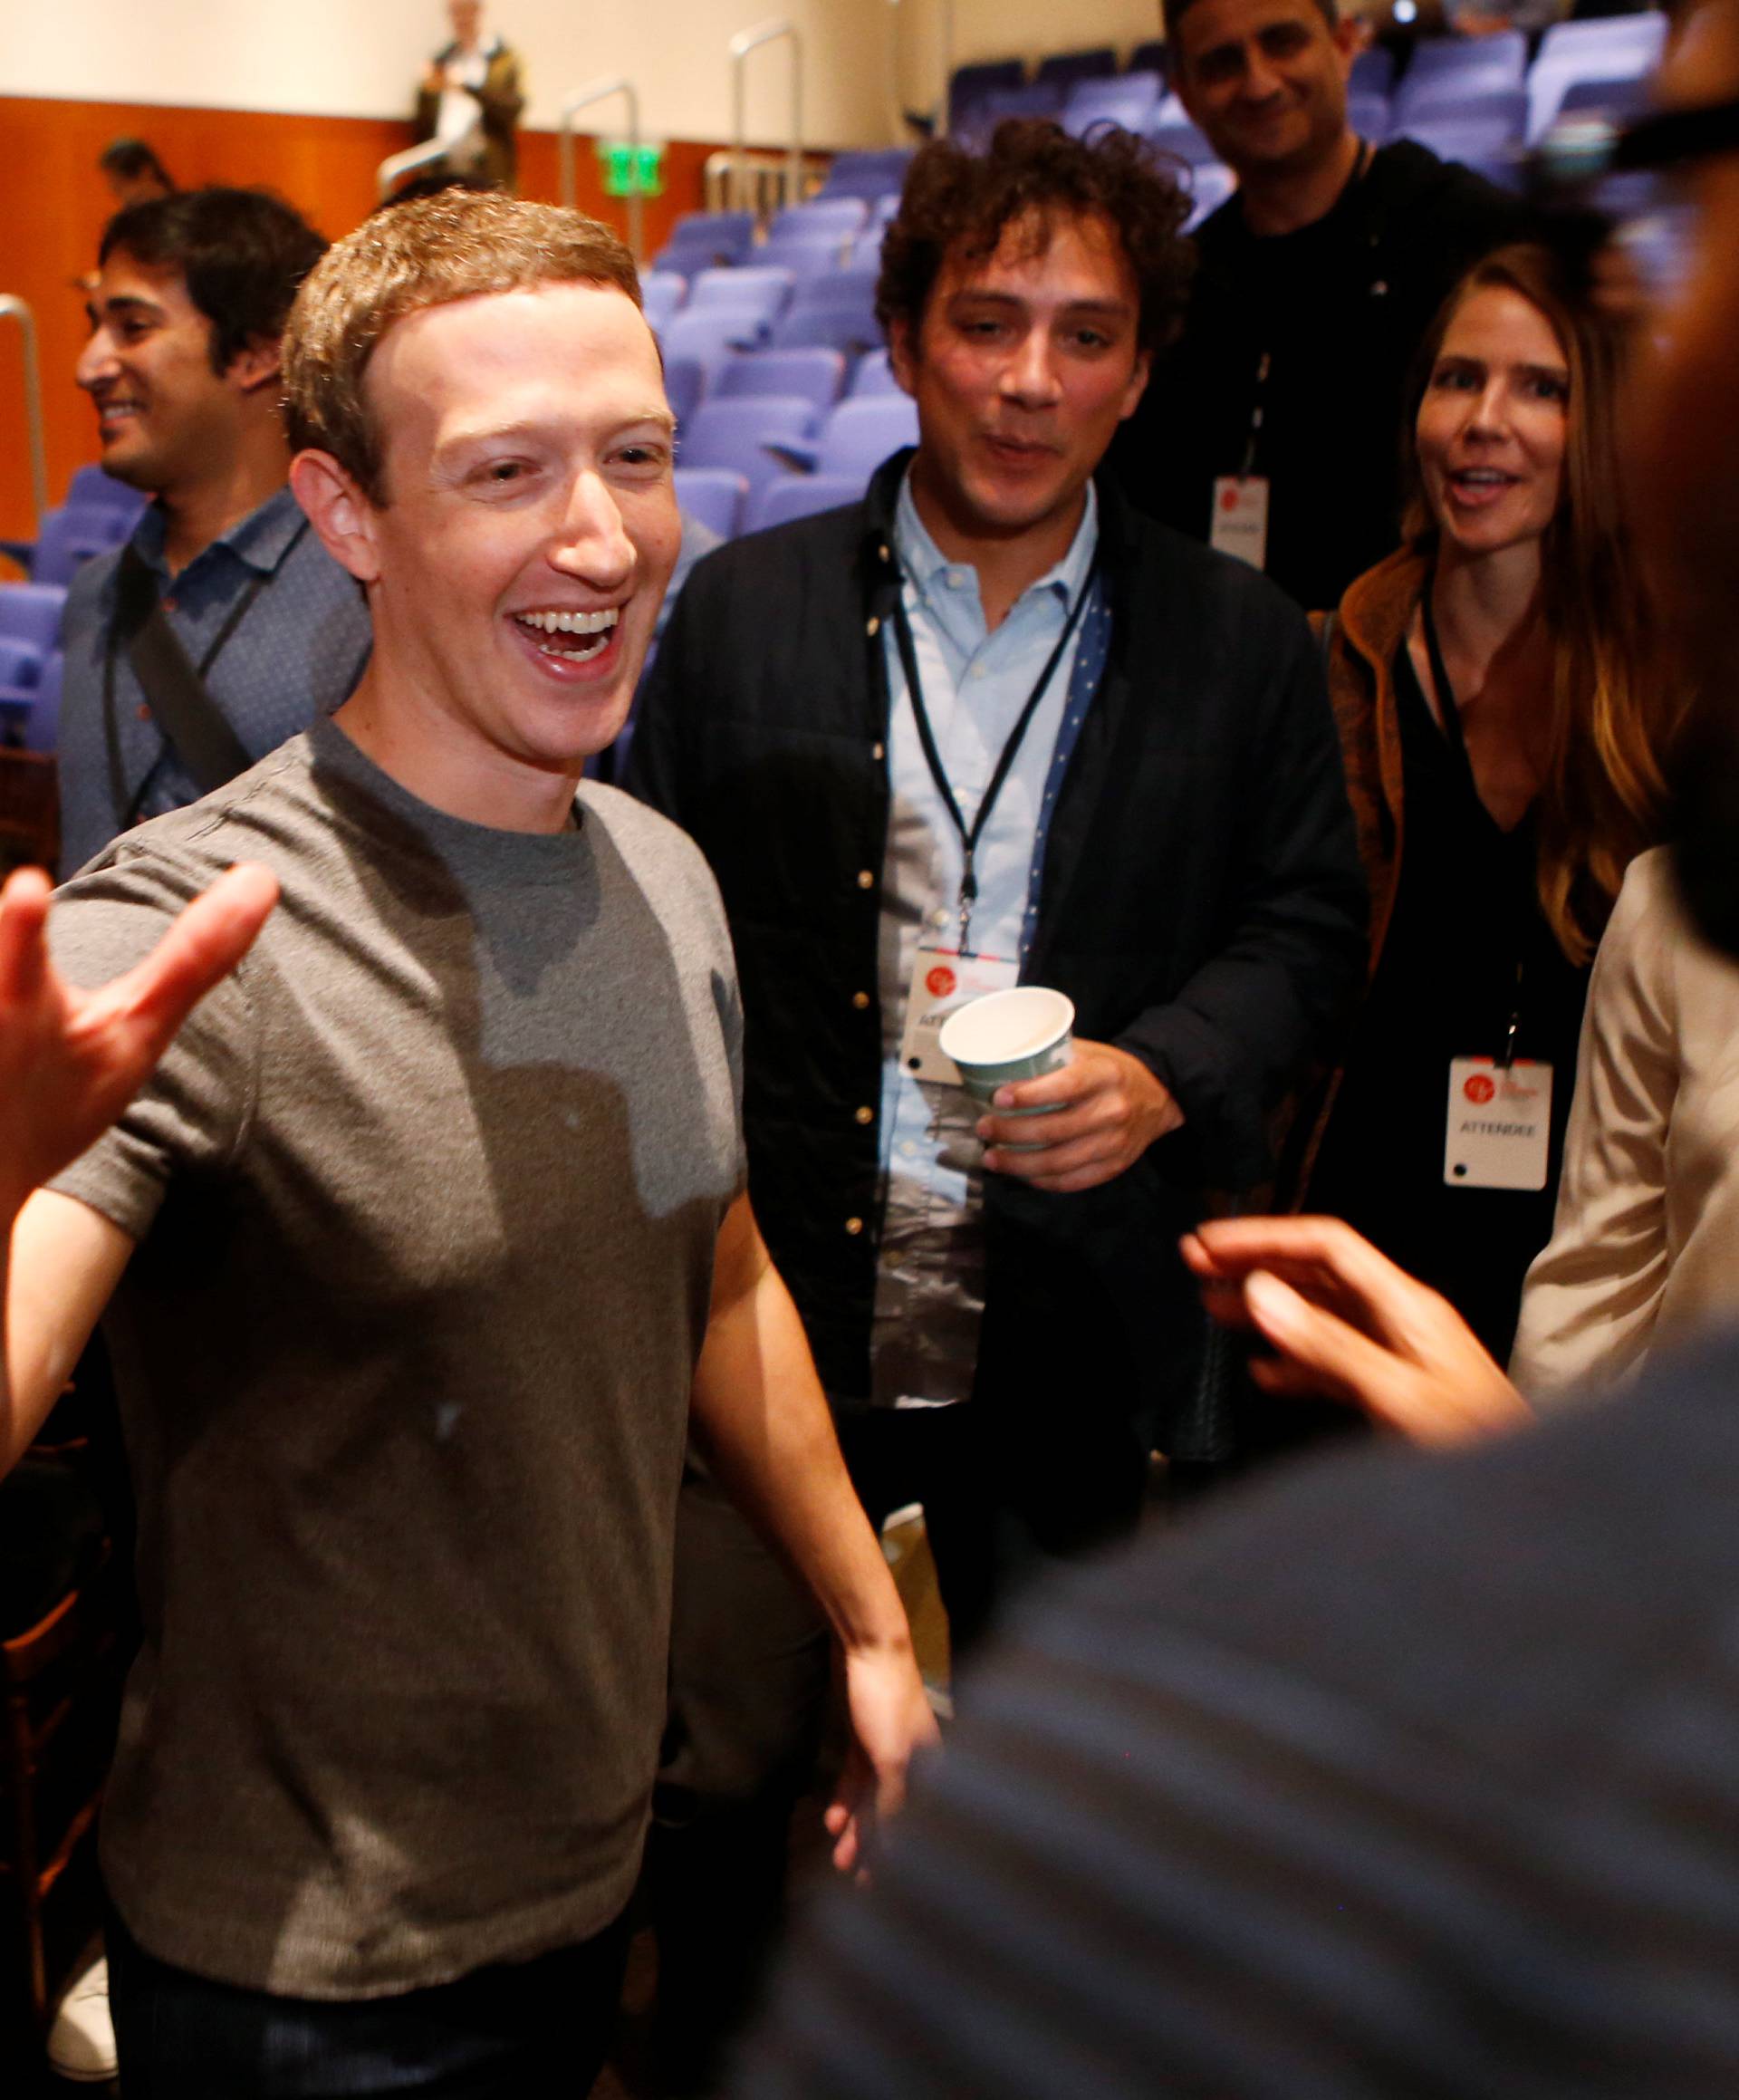 Mark Zuckerberg greets attendees after announcing the Chan Zuckerberg Initiative to cure all diseases by the end of the century during a news conference at UCSF Mission Bay in San Francisco, California